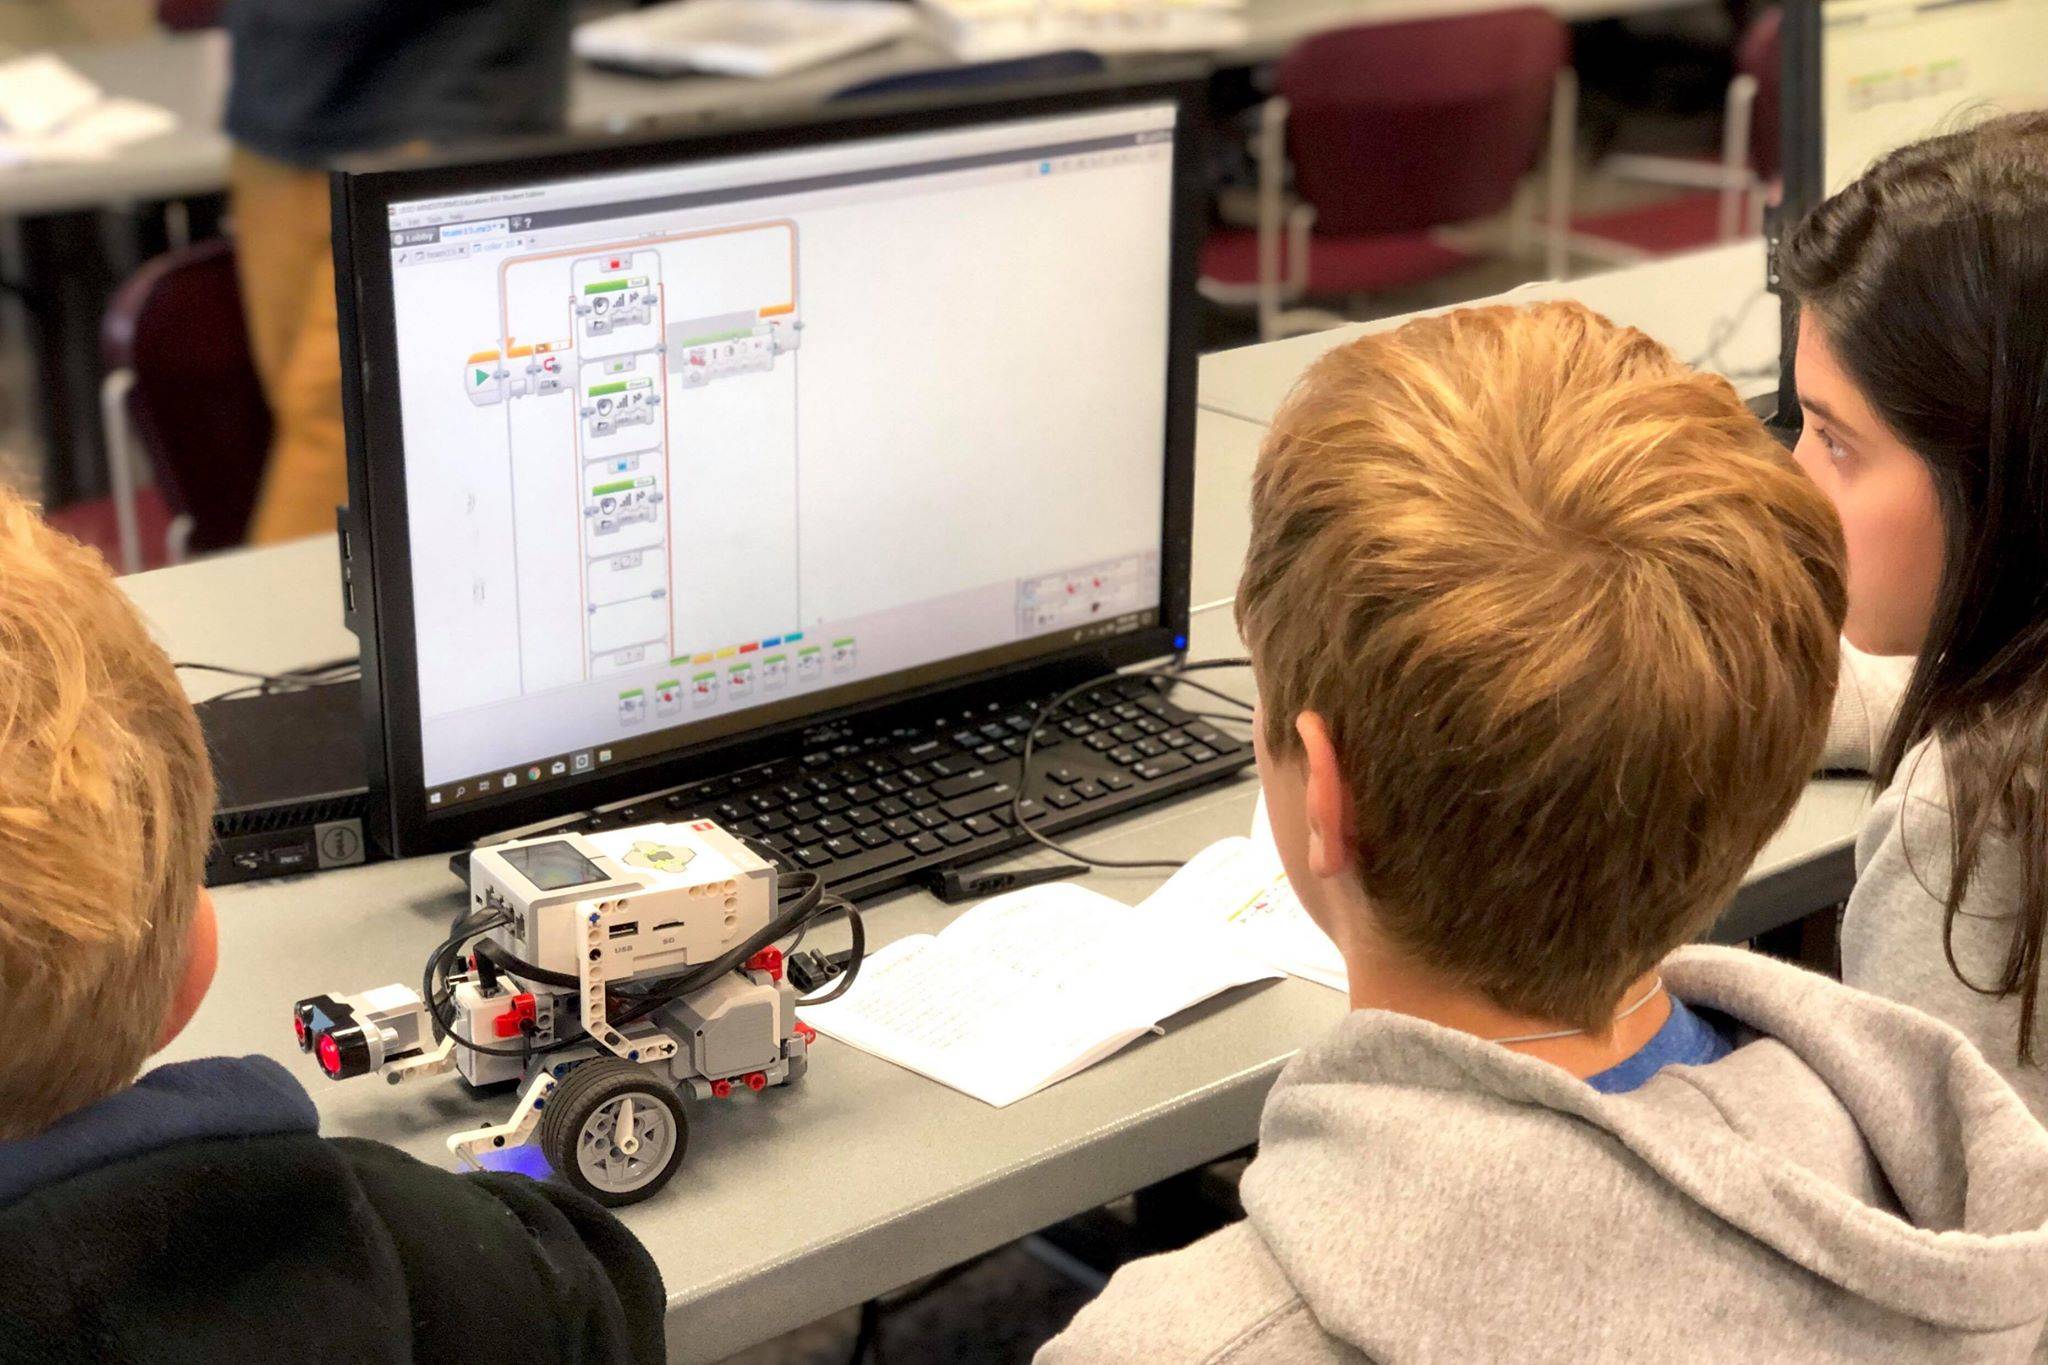 Students works on programming his Lego robot in the LEGO robotics UAA College of Engineering Summer Engineering Academies, on Wednesday, June 26, 2019, at the Kenai Peninsula College near Soldotna, Alaska. (Photo by Victoria Petersen/Peninsula Clarion)